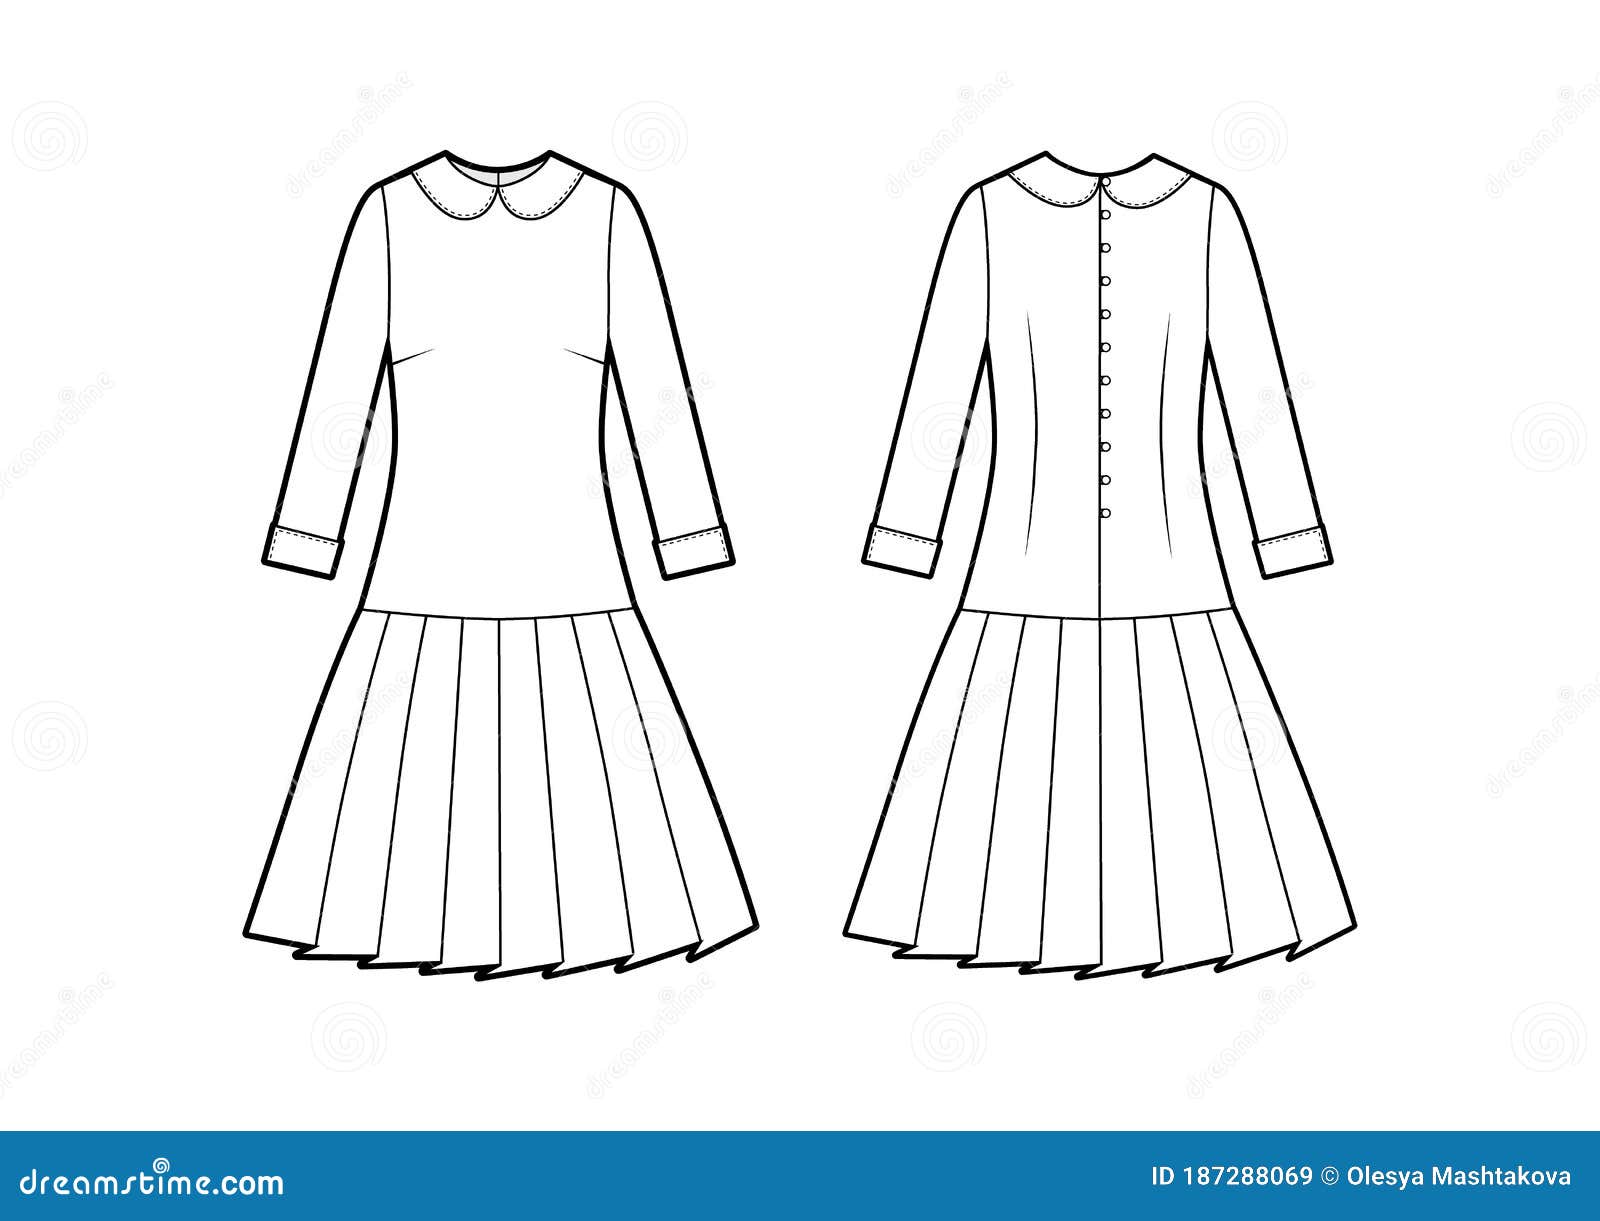 How to Draw Designer Pleated with Frill Dress  Fashion Design  Illustration  YouTube